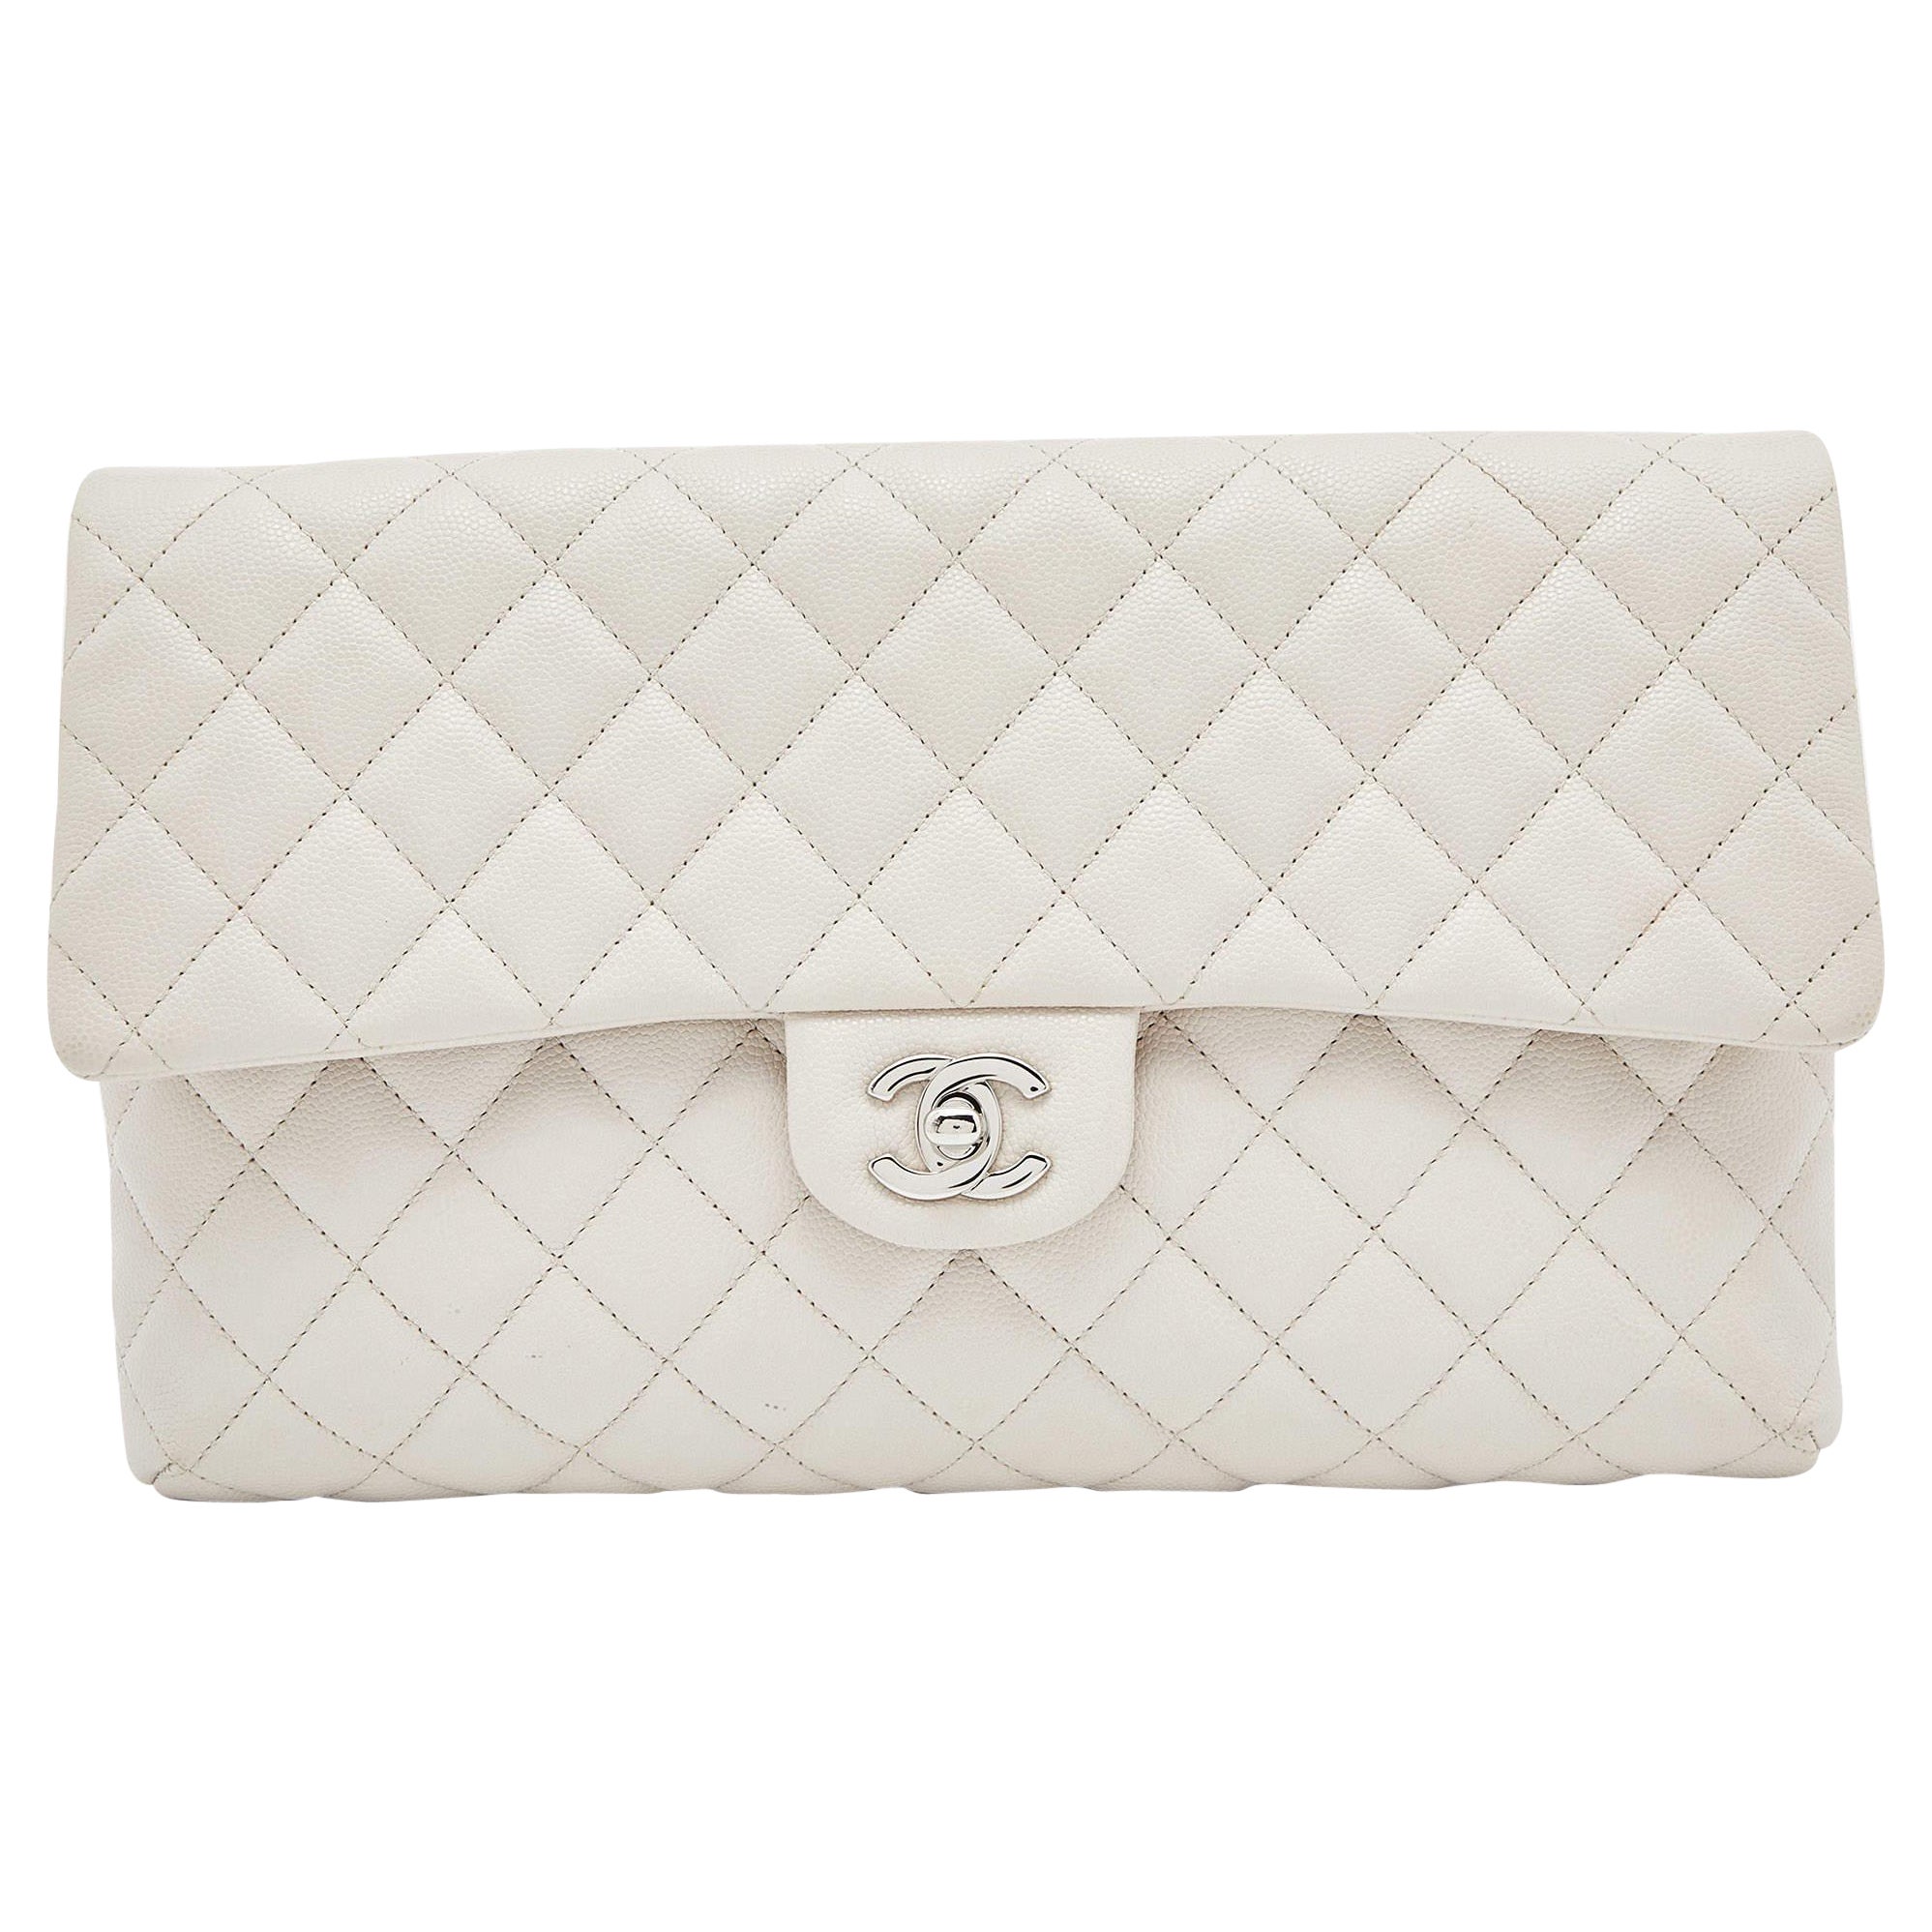 Chanel Off White Quilted Caviar Leather Flap Clutch